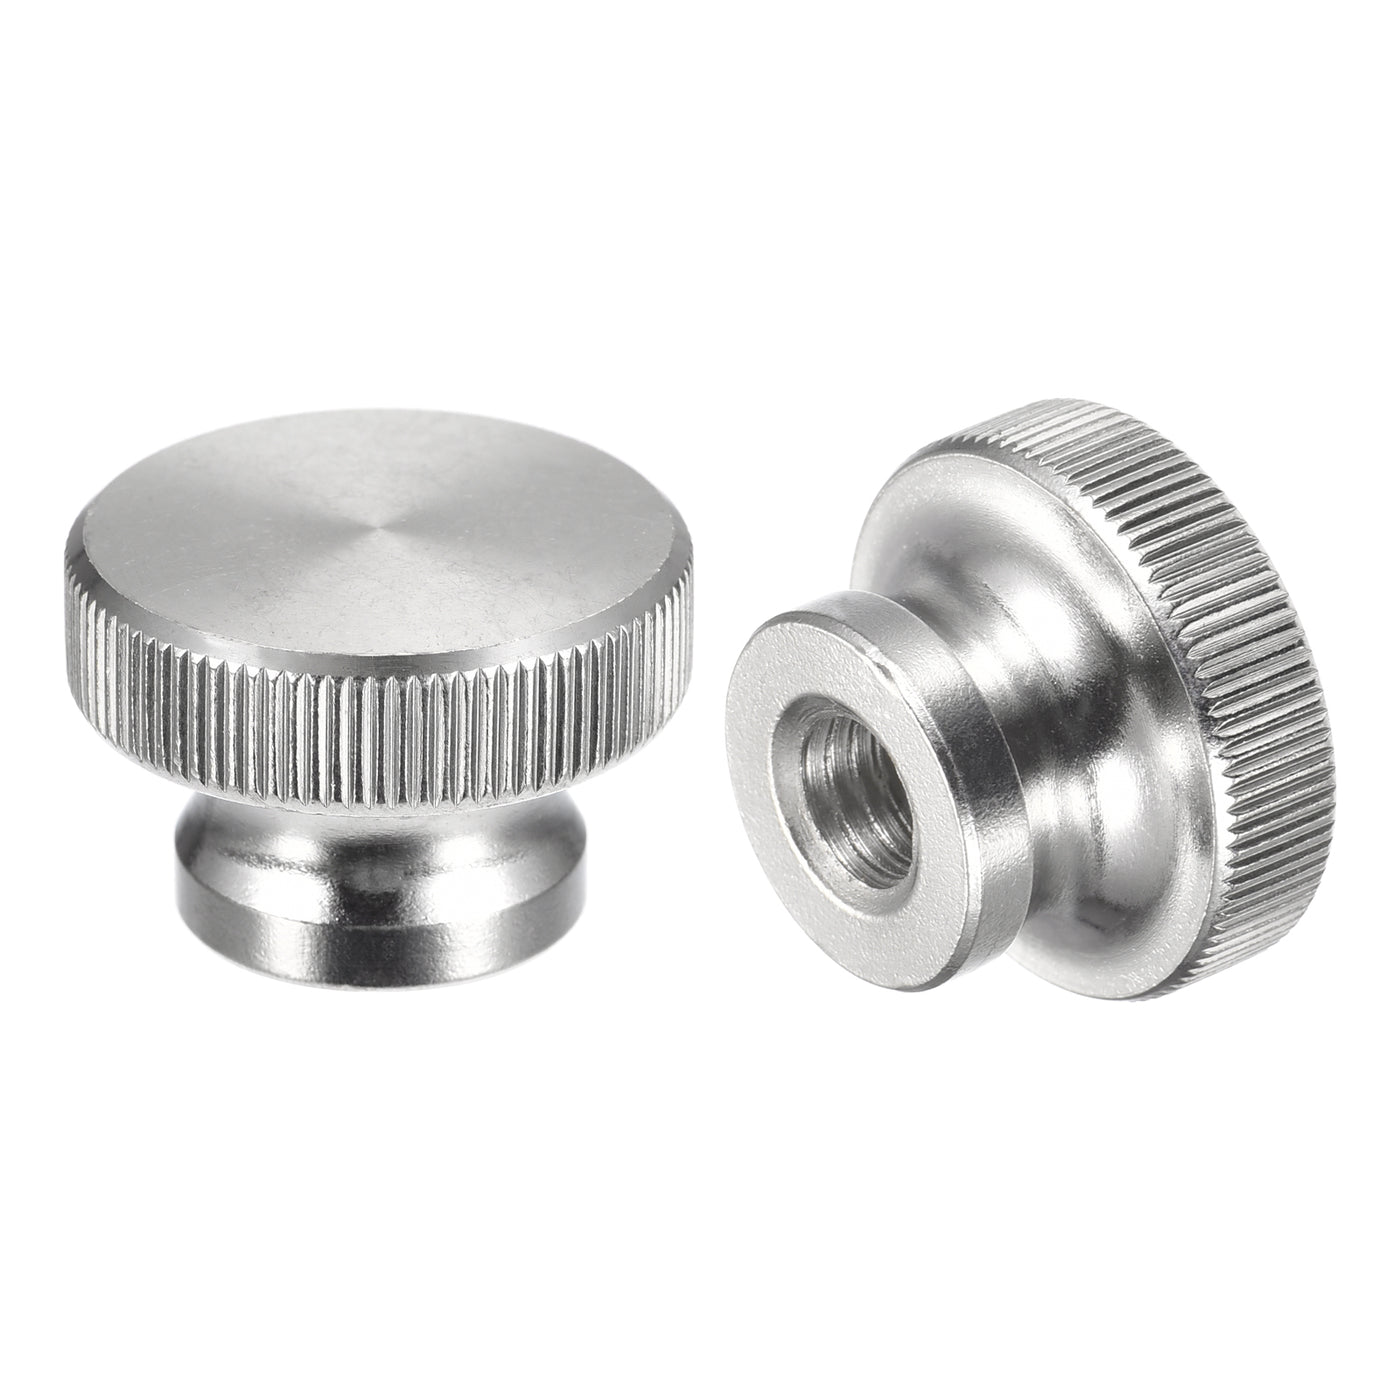 uxcell Uxcell Knurled Thumb Nuts, 2pcs M10 x D30mm x H20mm 304 Stainless Steel Blind Hole Nuts